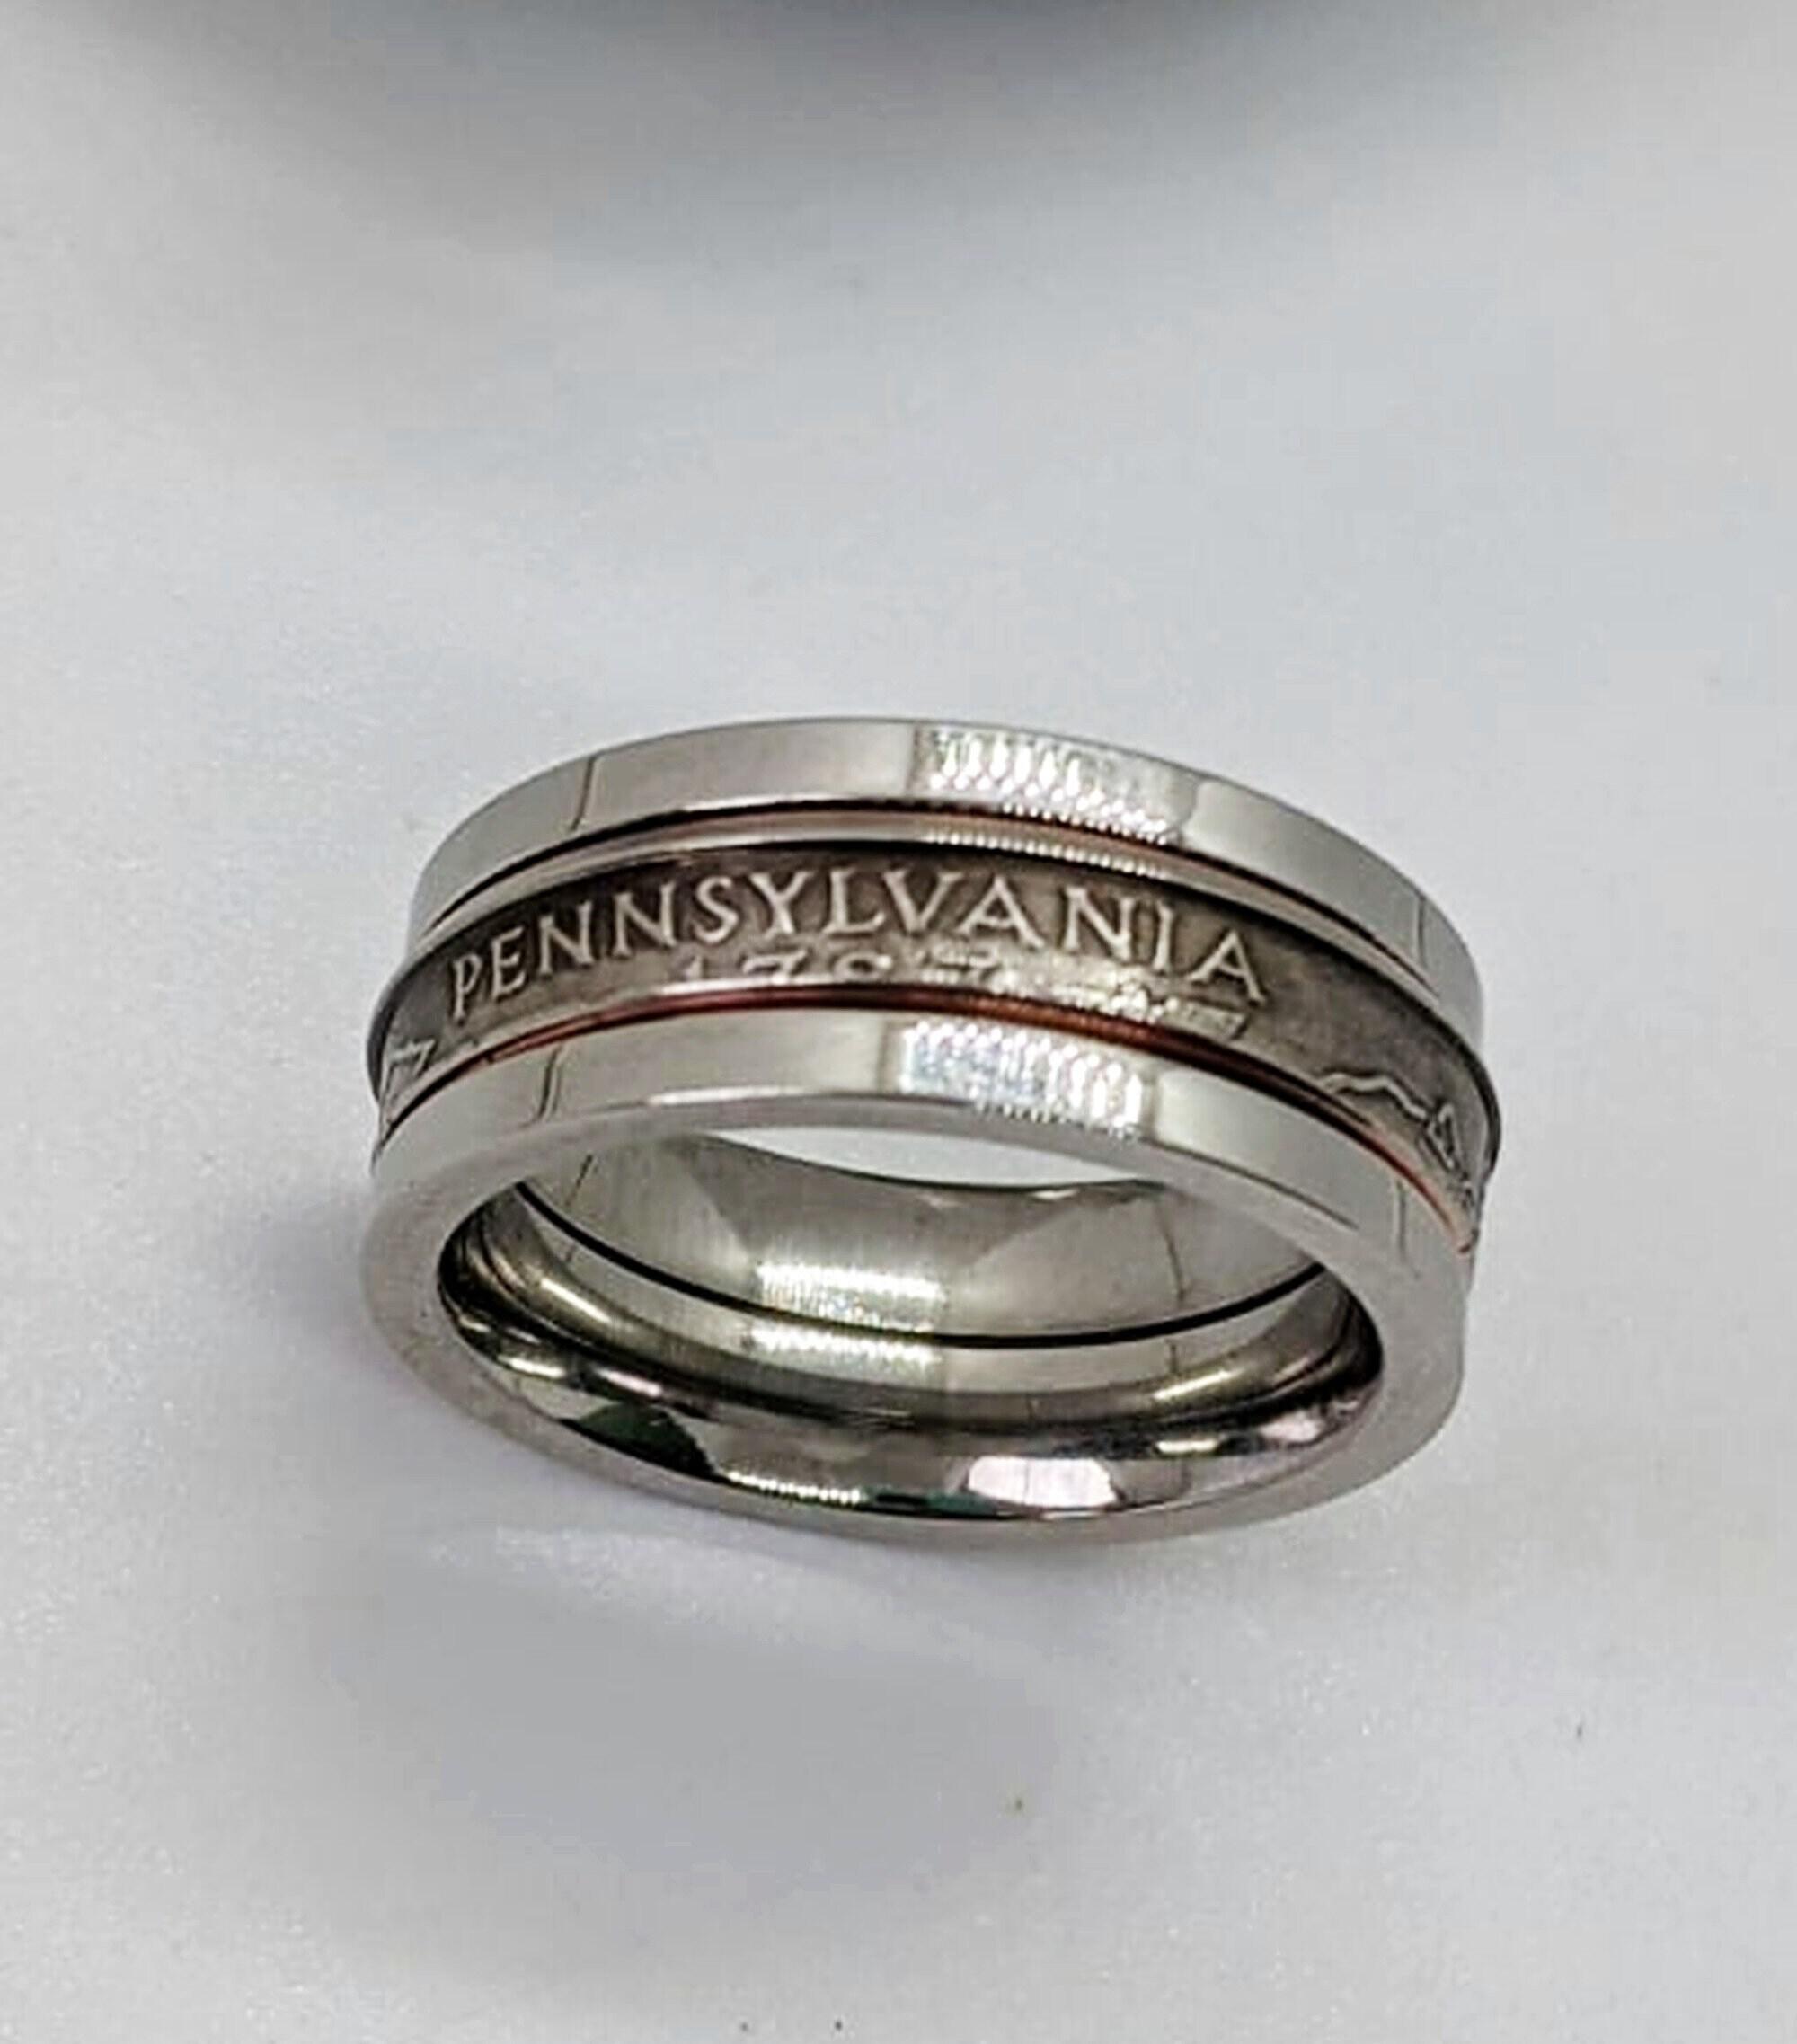 Making a Spinner Ring from Two Coins - YouTube